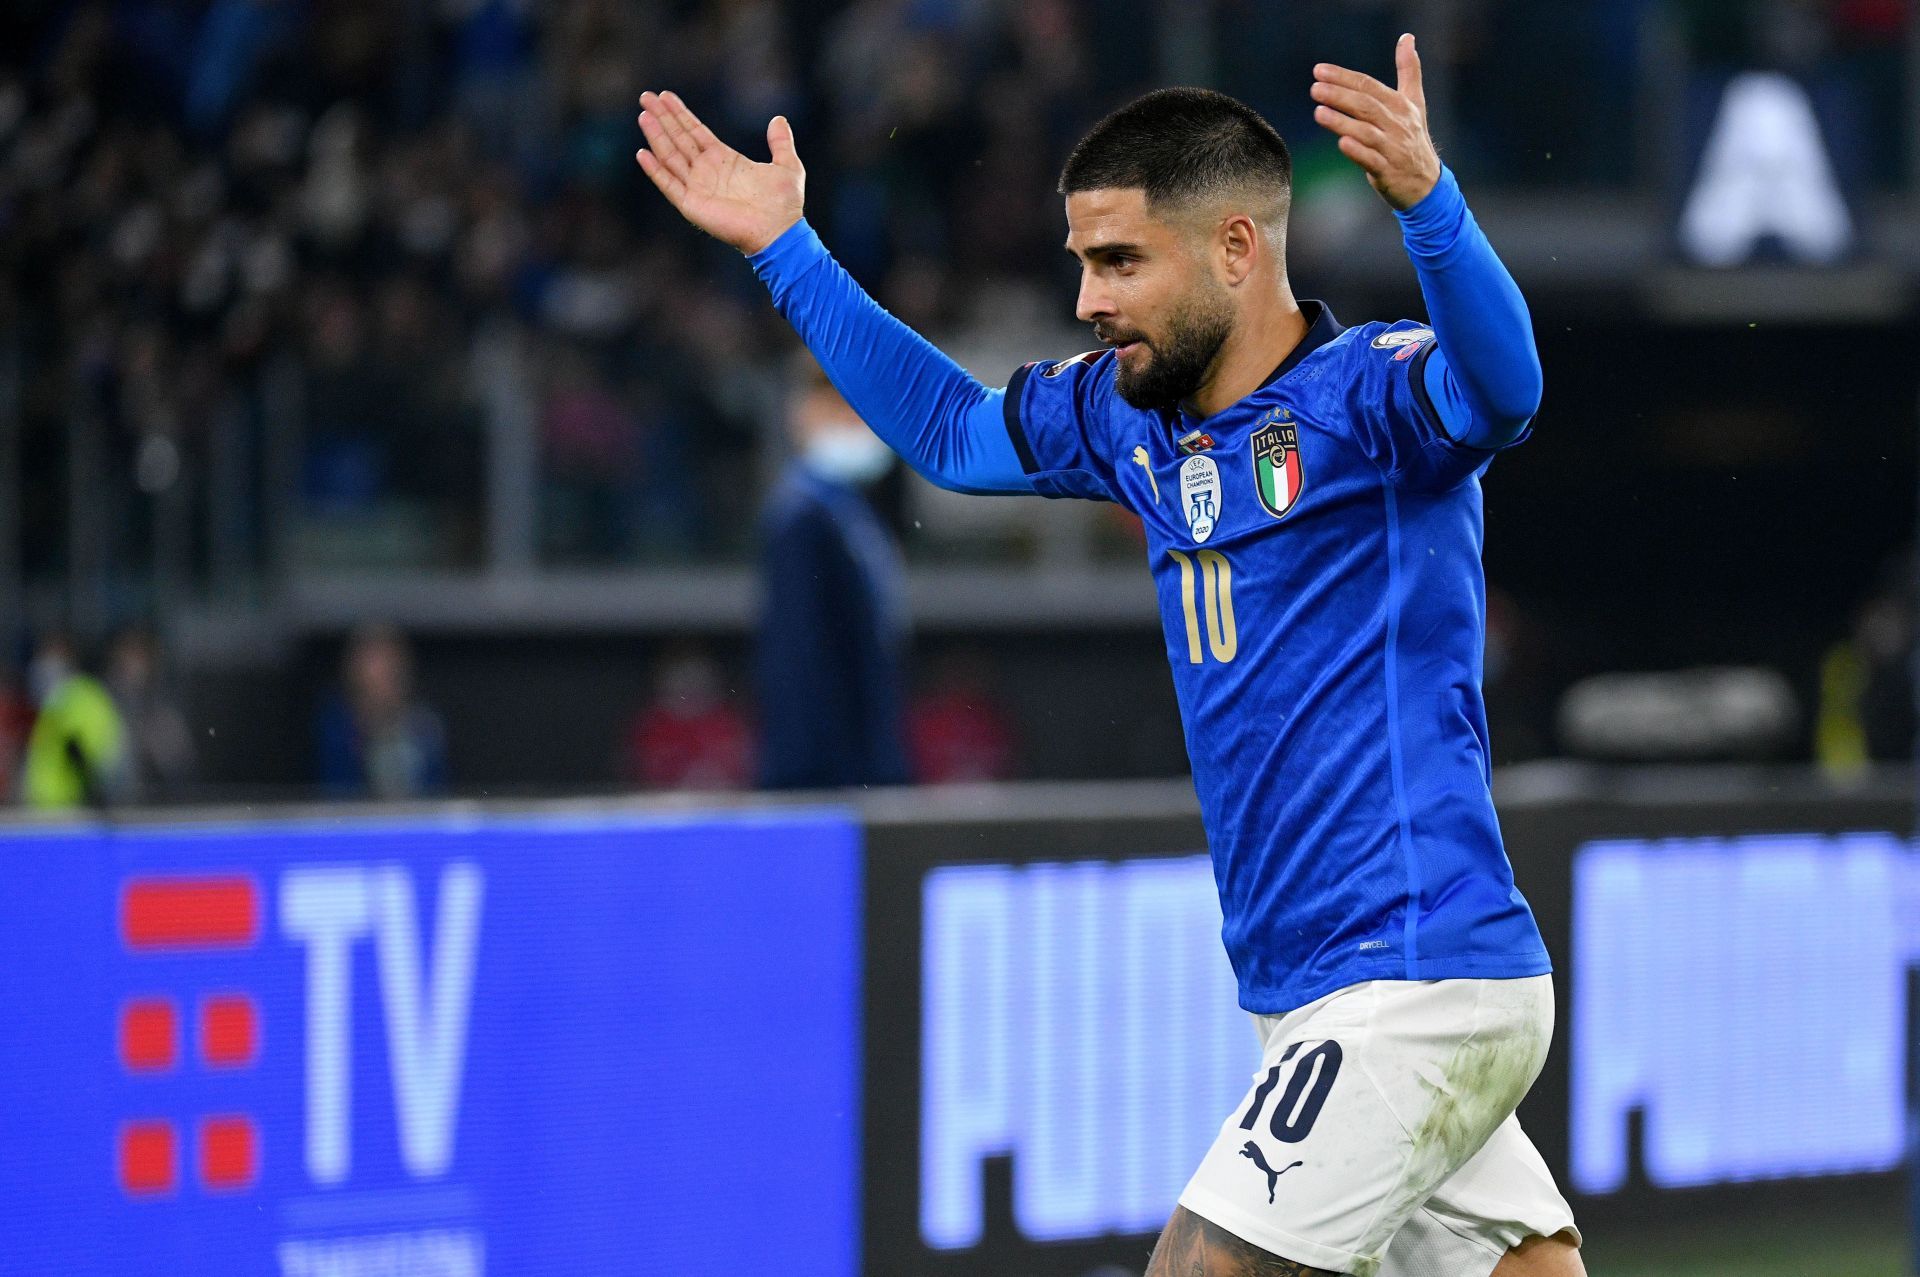 Chelsea have received a boost in their pursuit of Lorenzo Insigne.